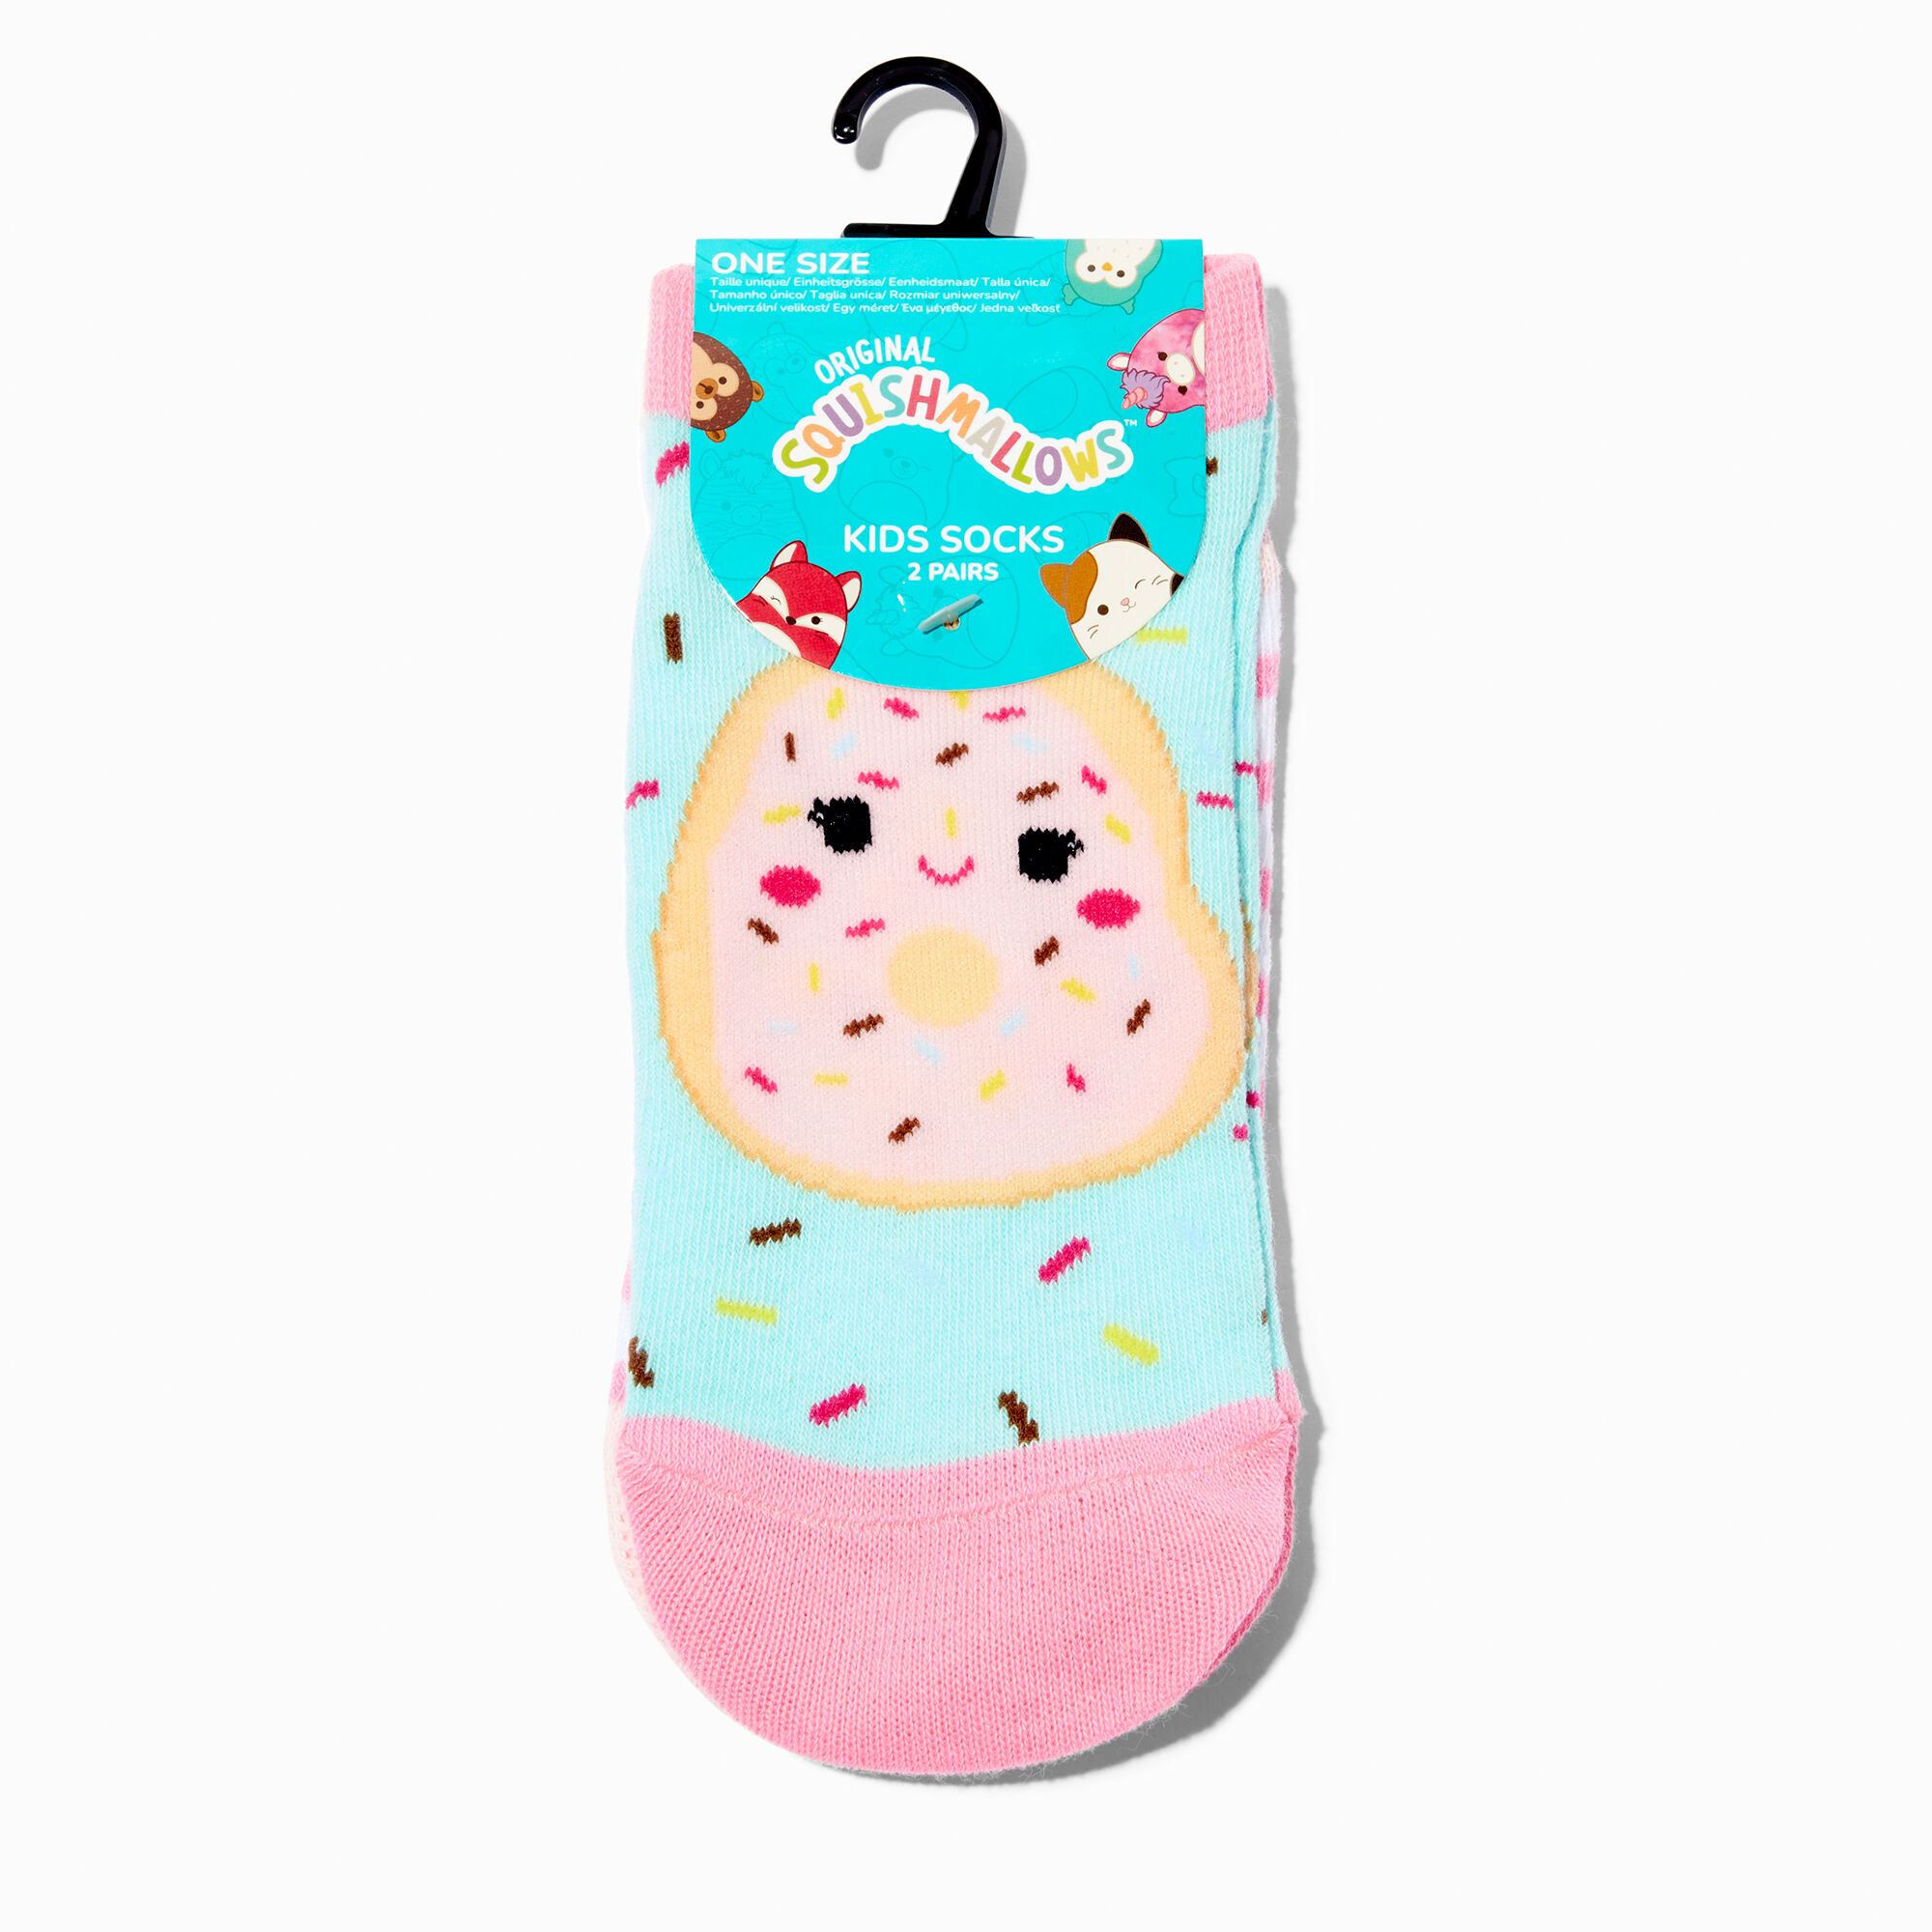 View Claires Squishmallows Socks 2 Pack information